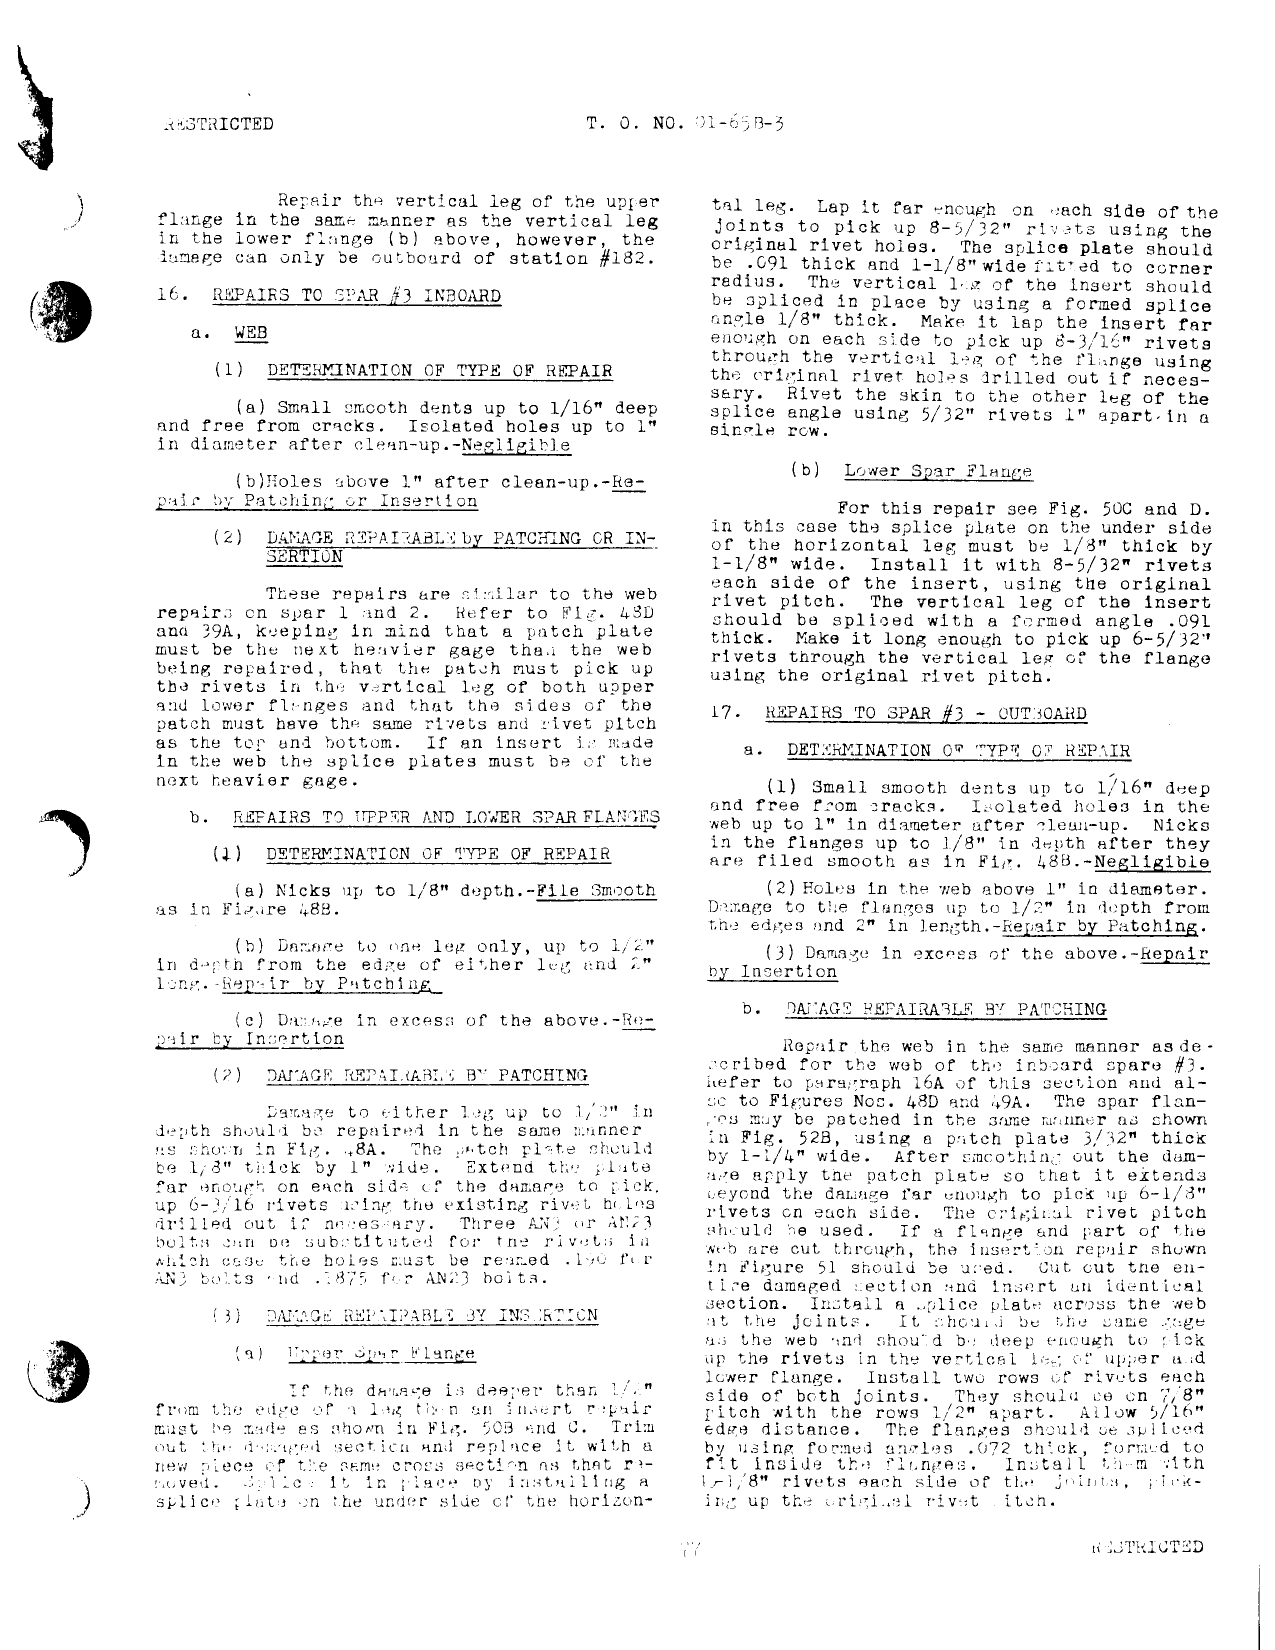 Sample page 89 from AirCorps Library document: Structural Repair Instructions - P-47